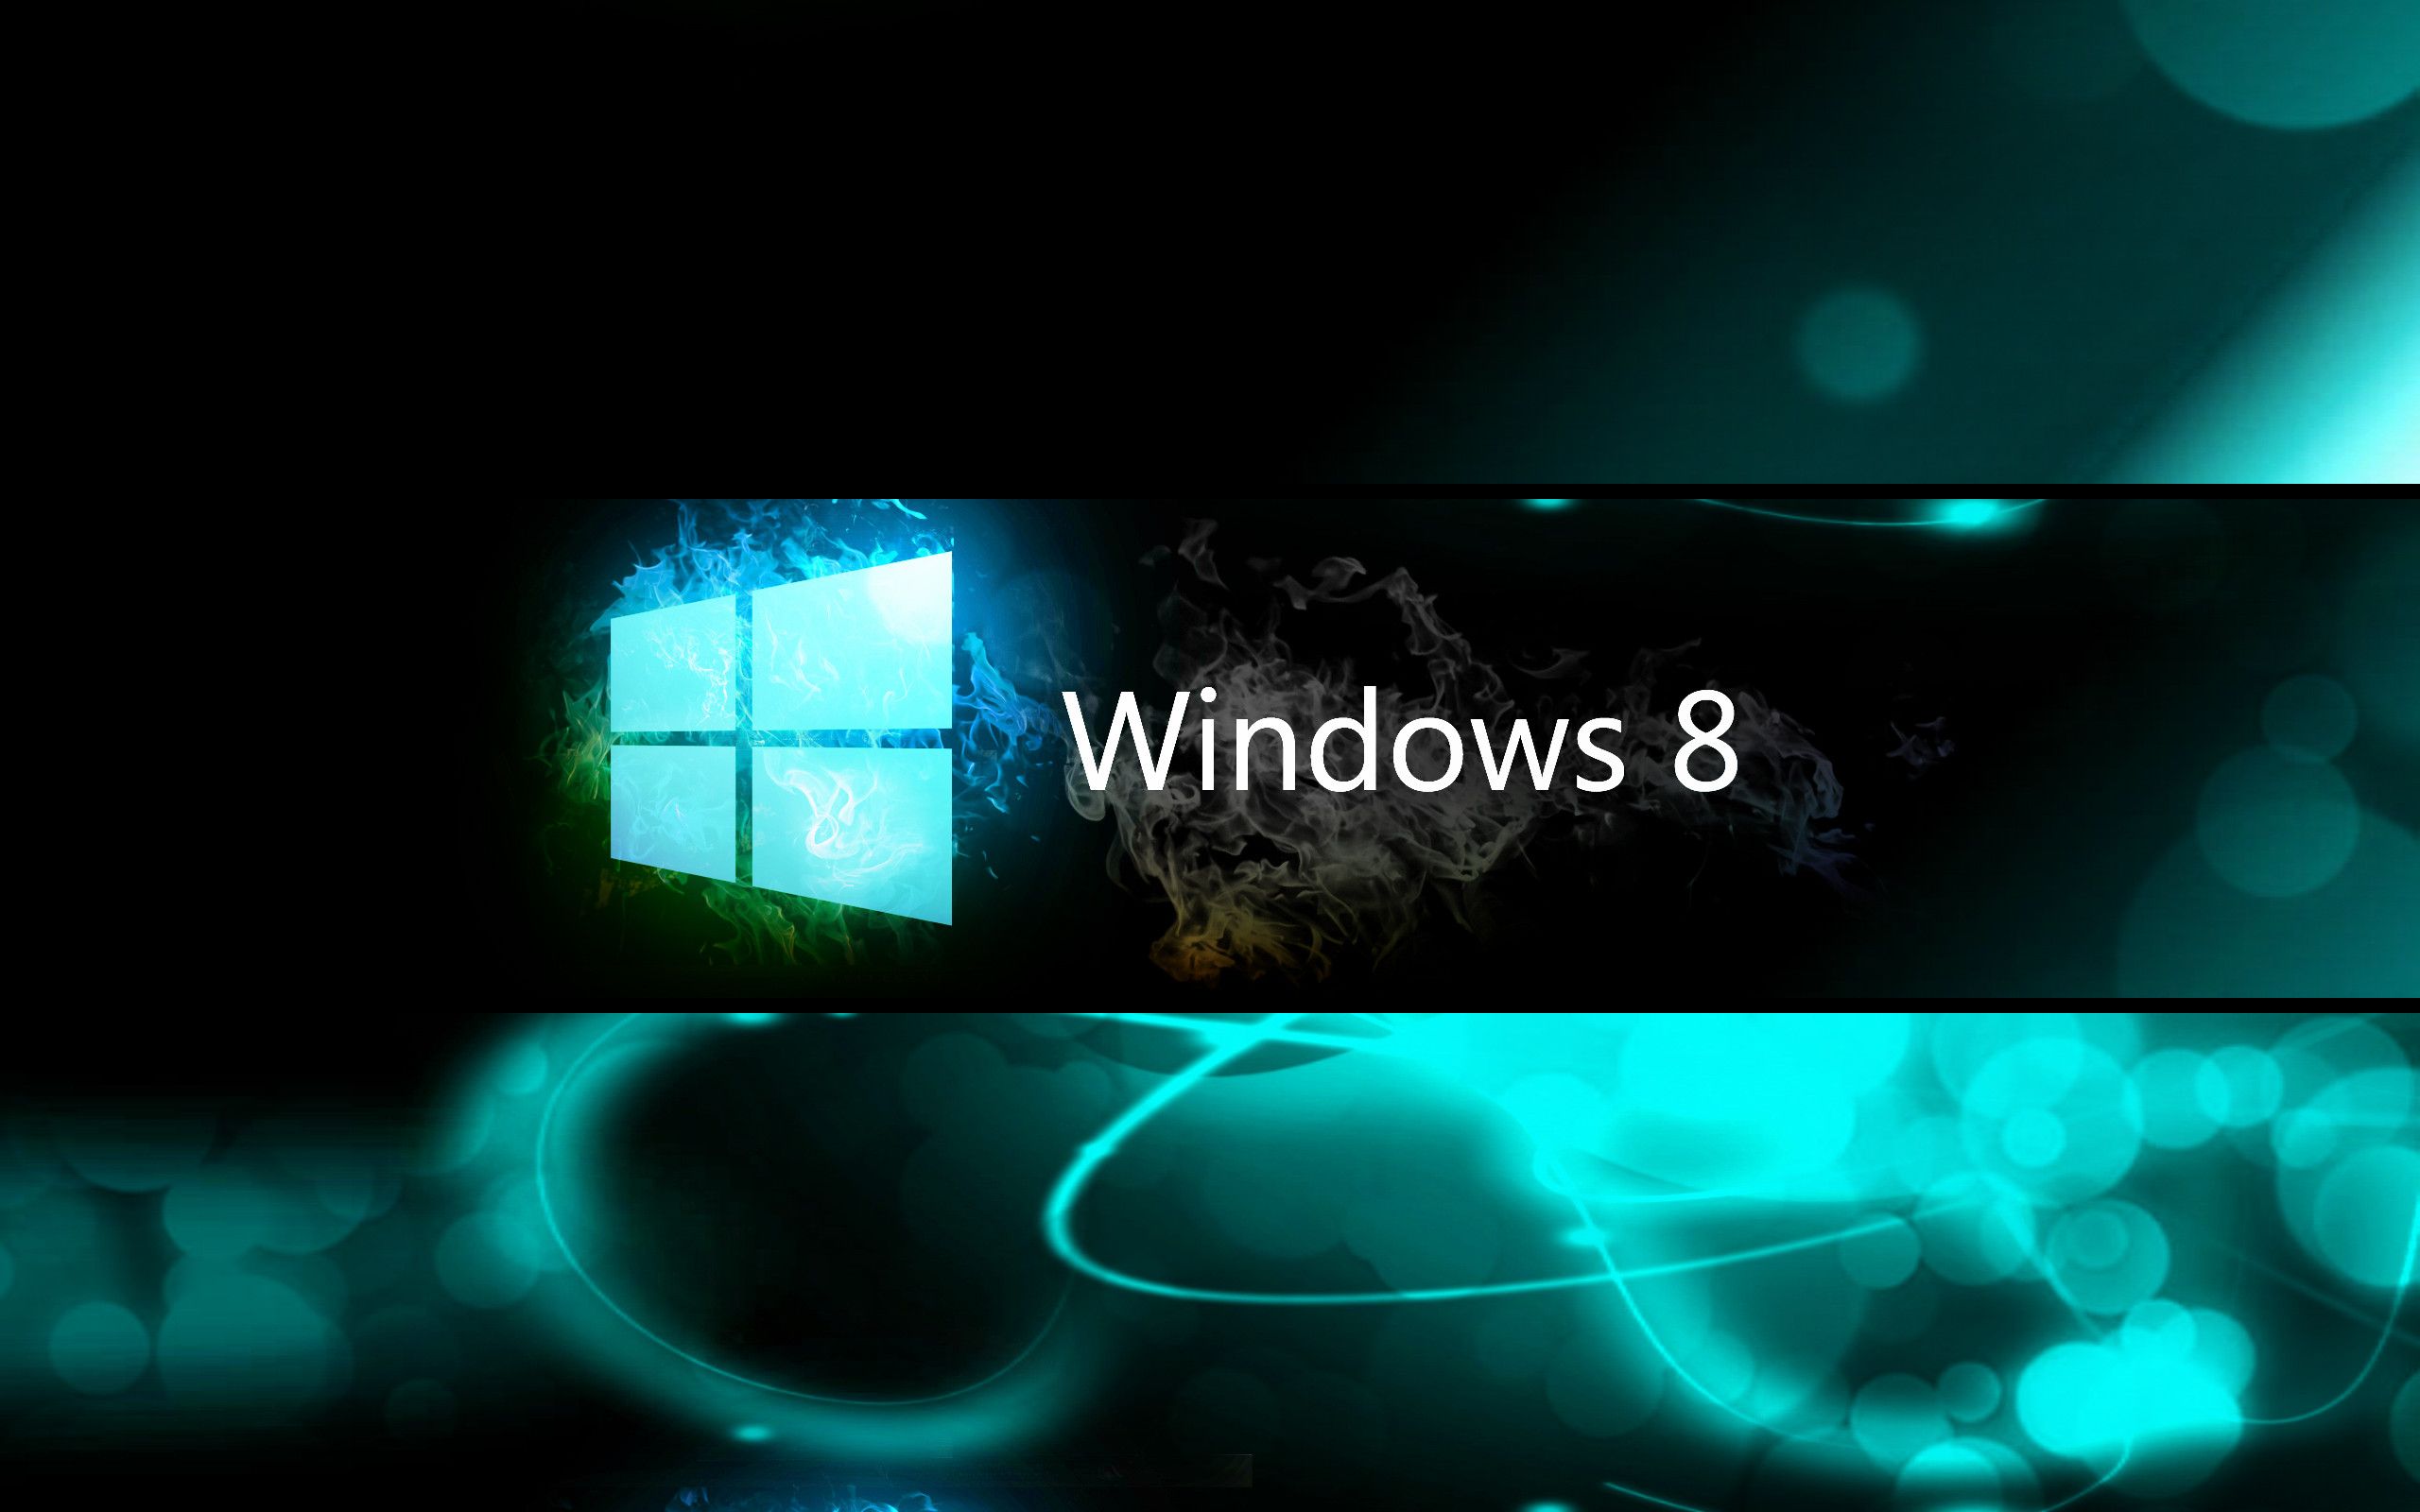 Windows 8 Background Image for PC | Wallpaper | cool wallpapers ...